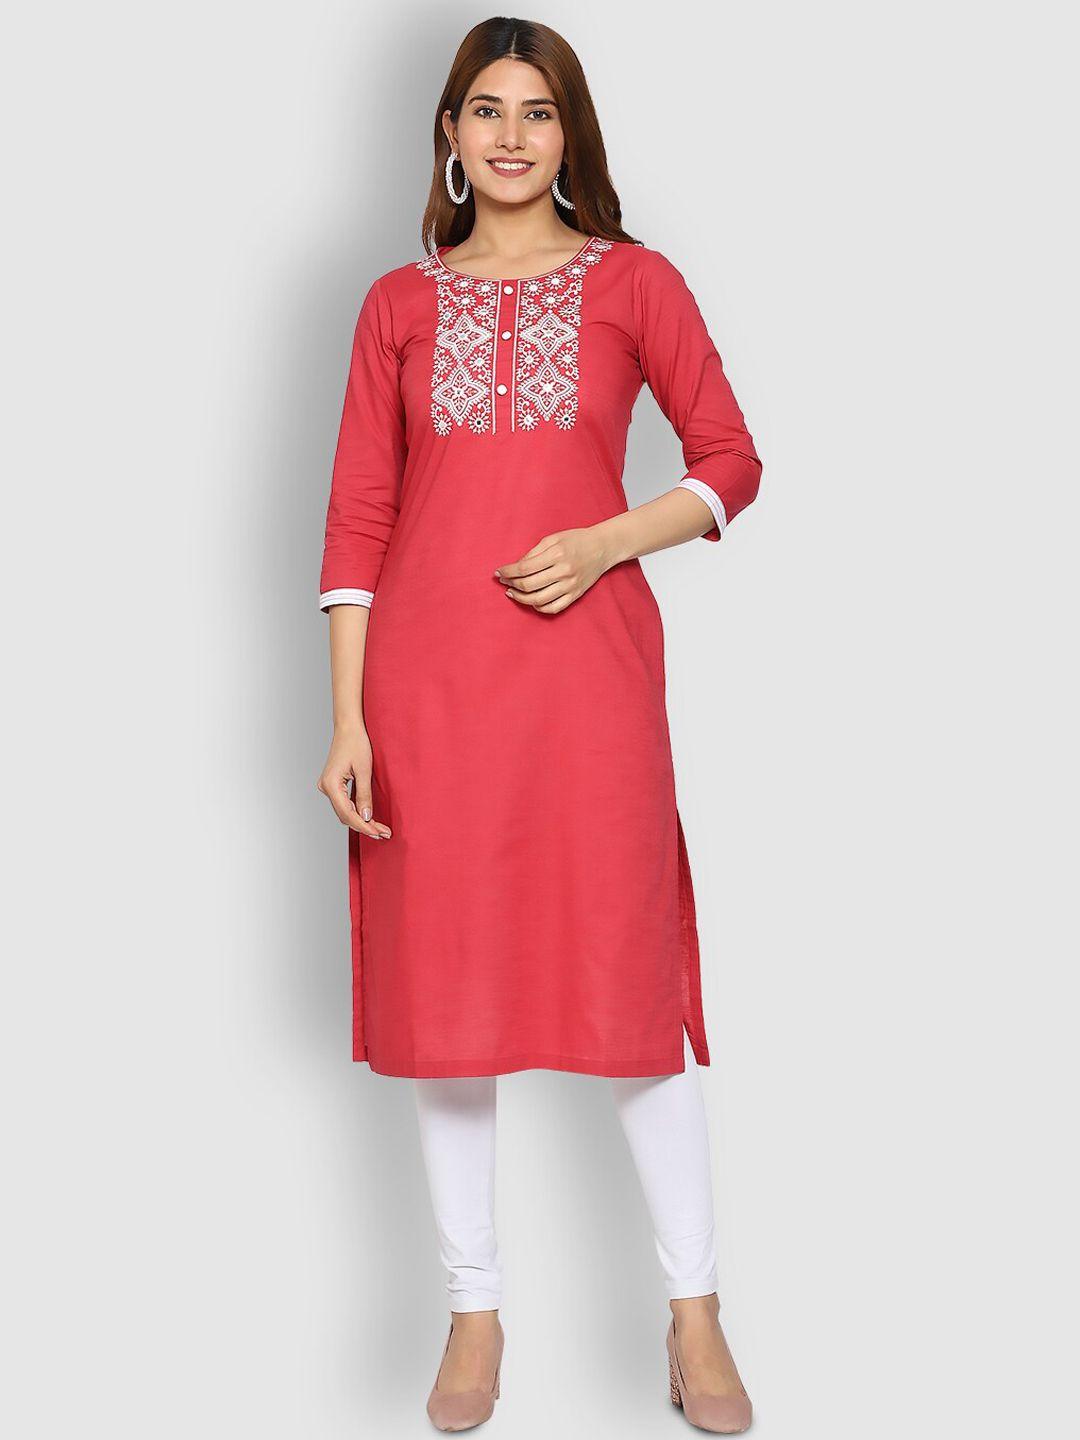 shereen women red floral embroidered kurta